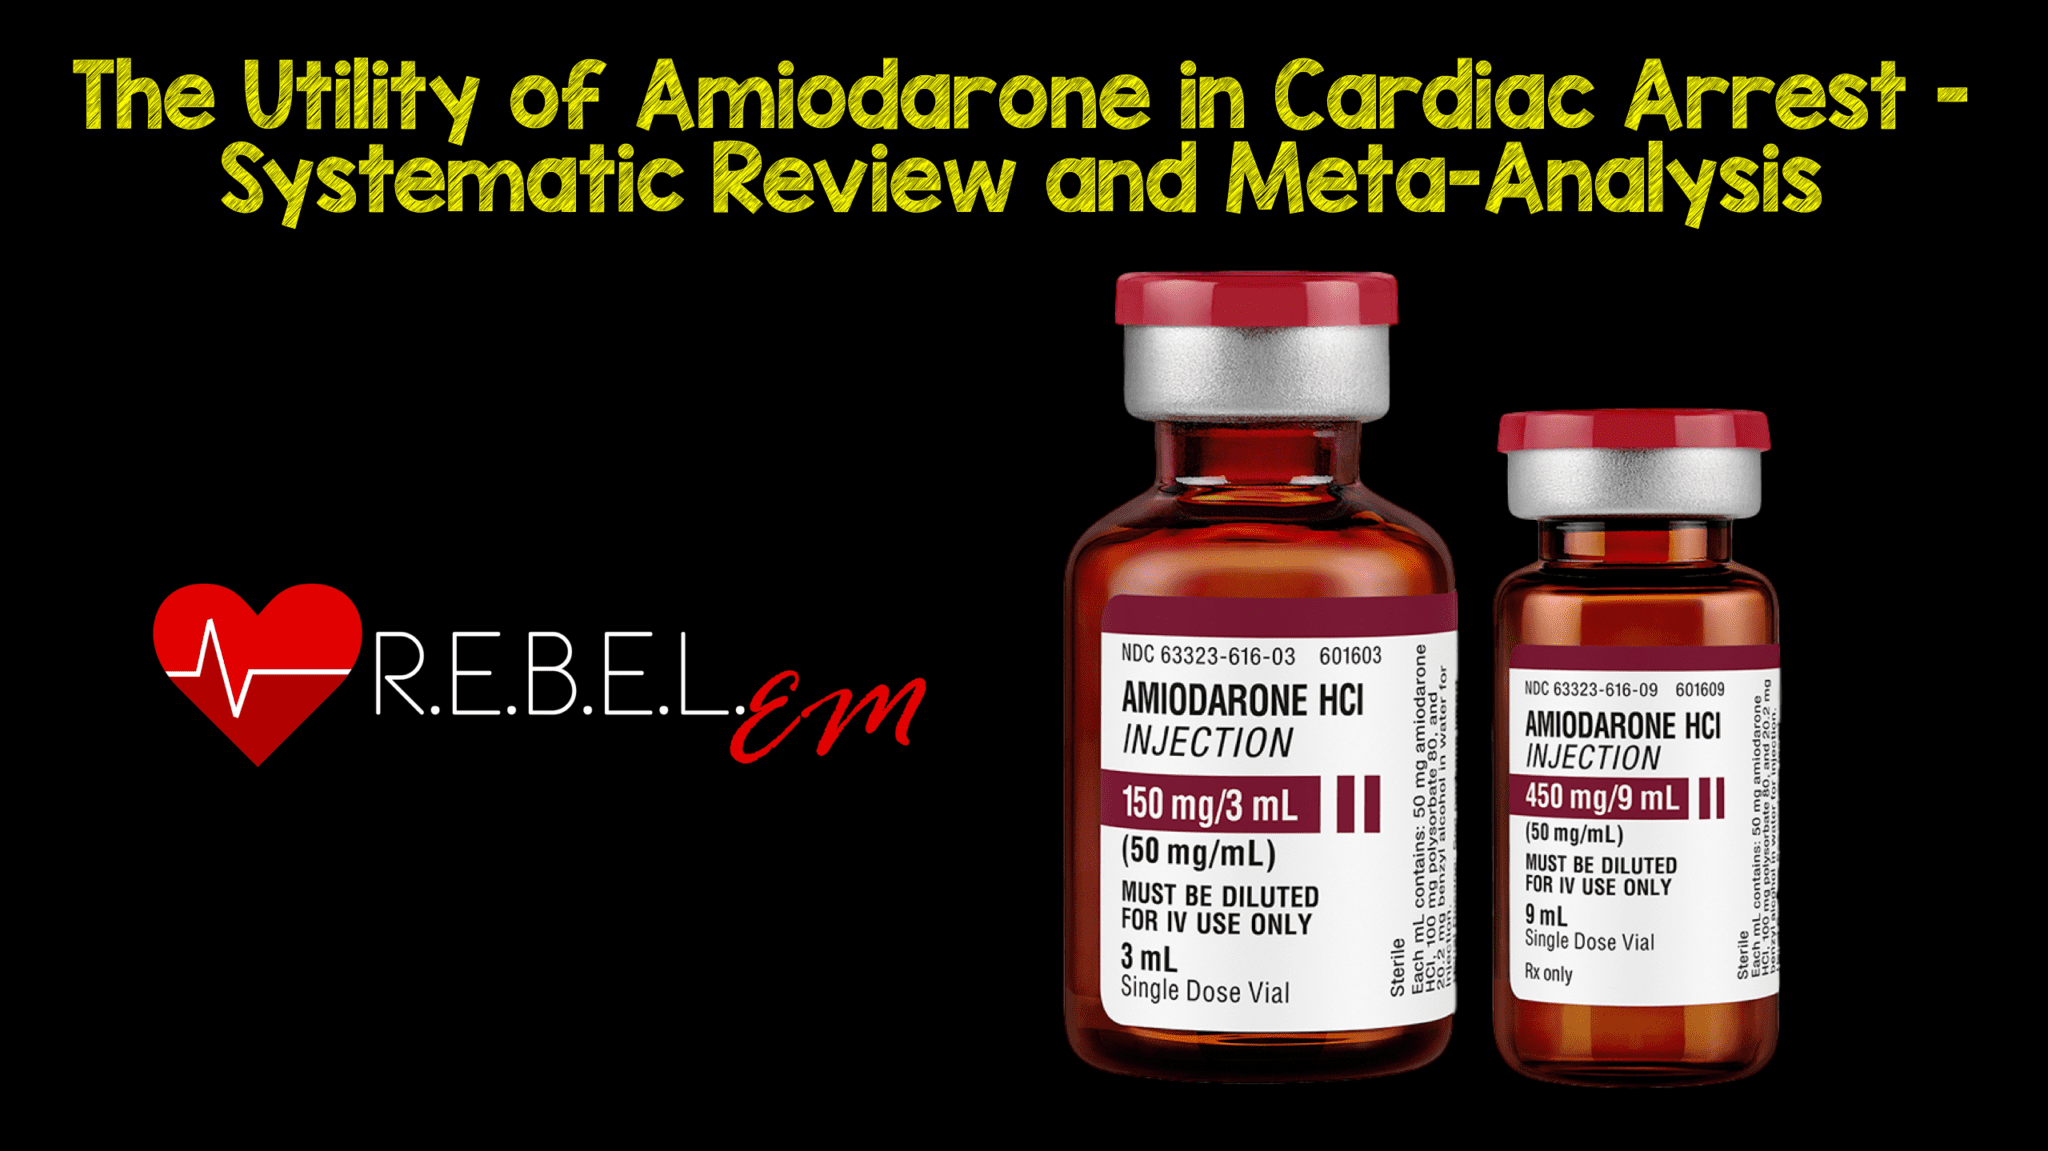 The Utility of Amiodarone in Cardiac Arrest Systematic Review and